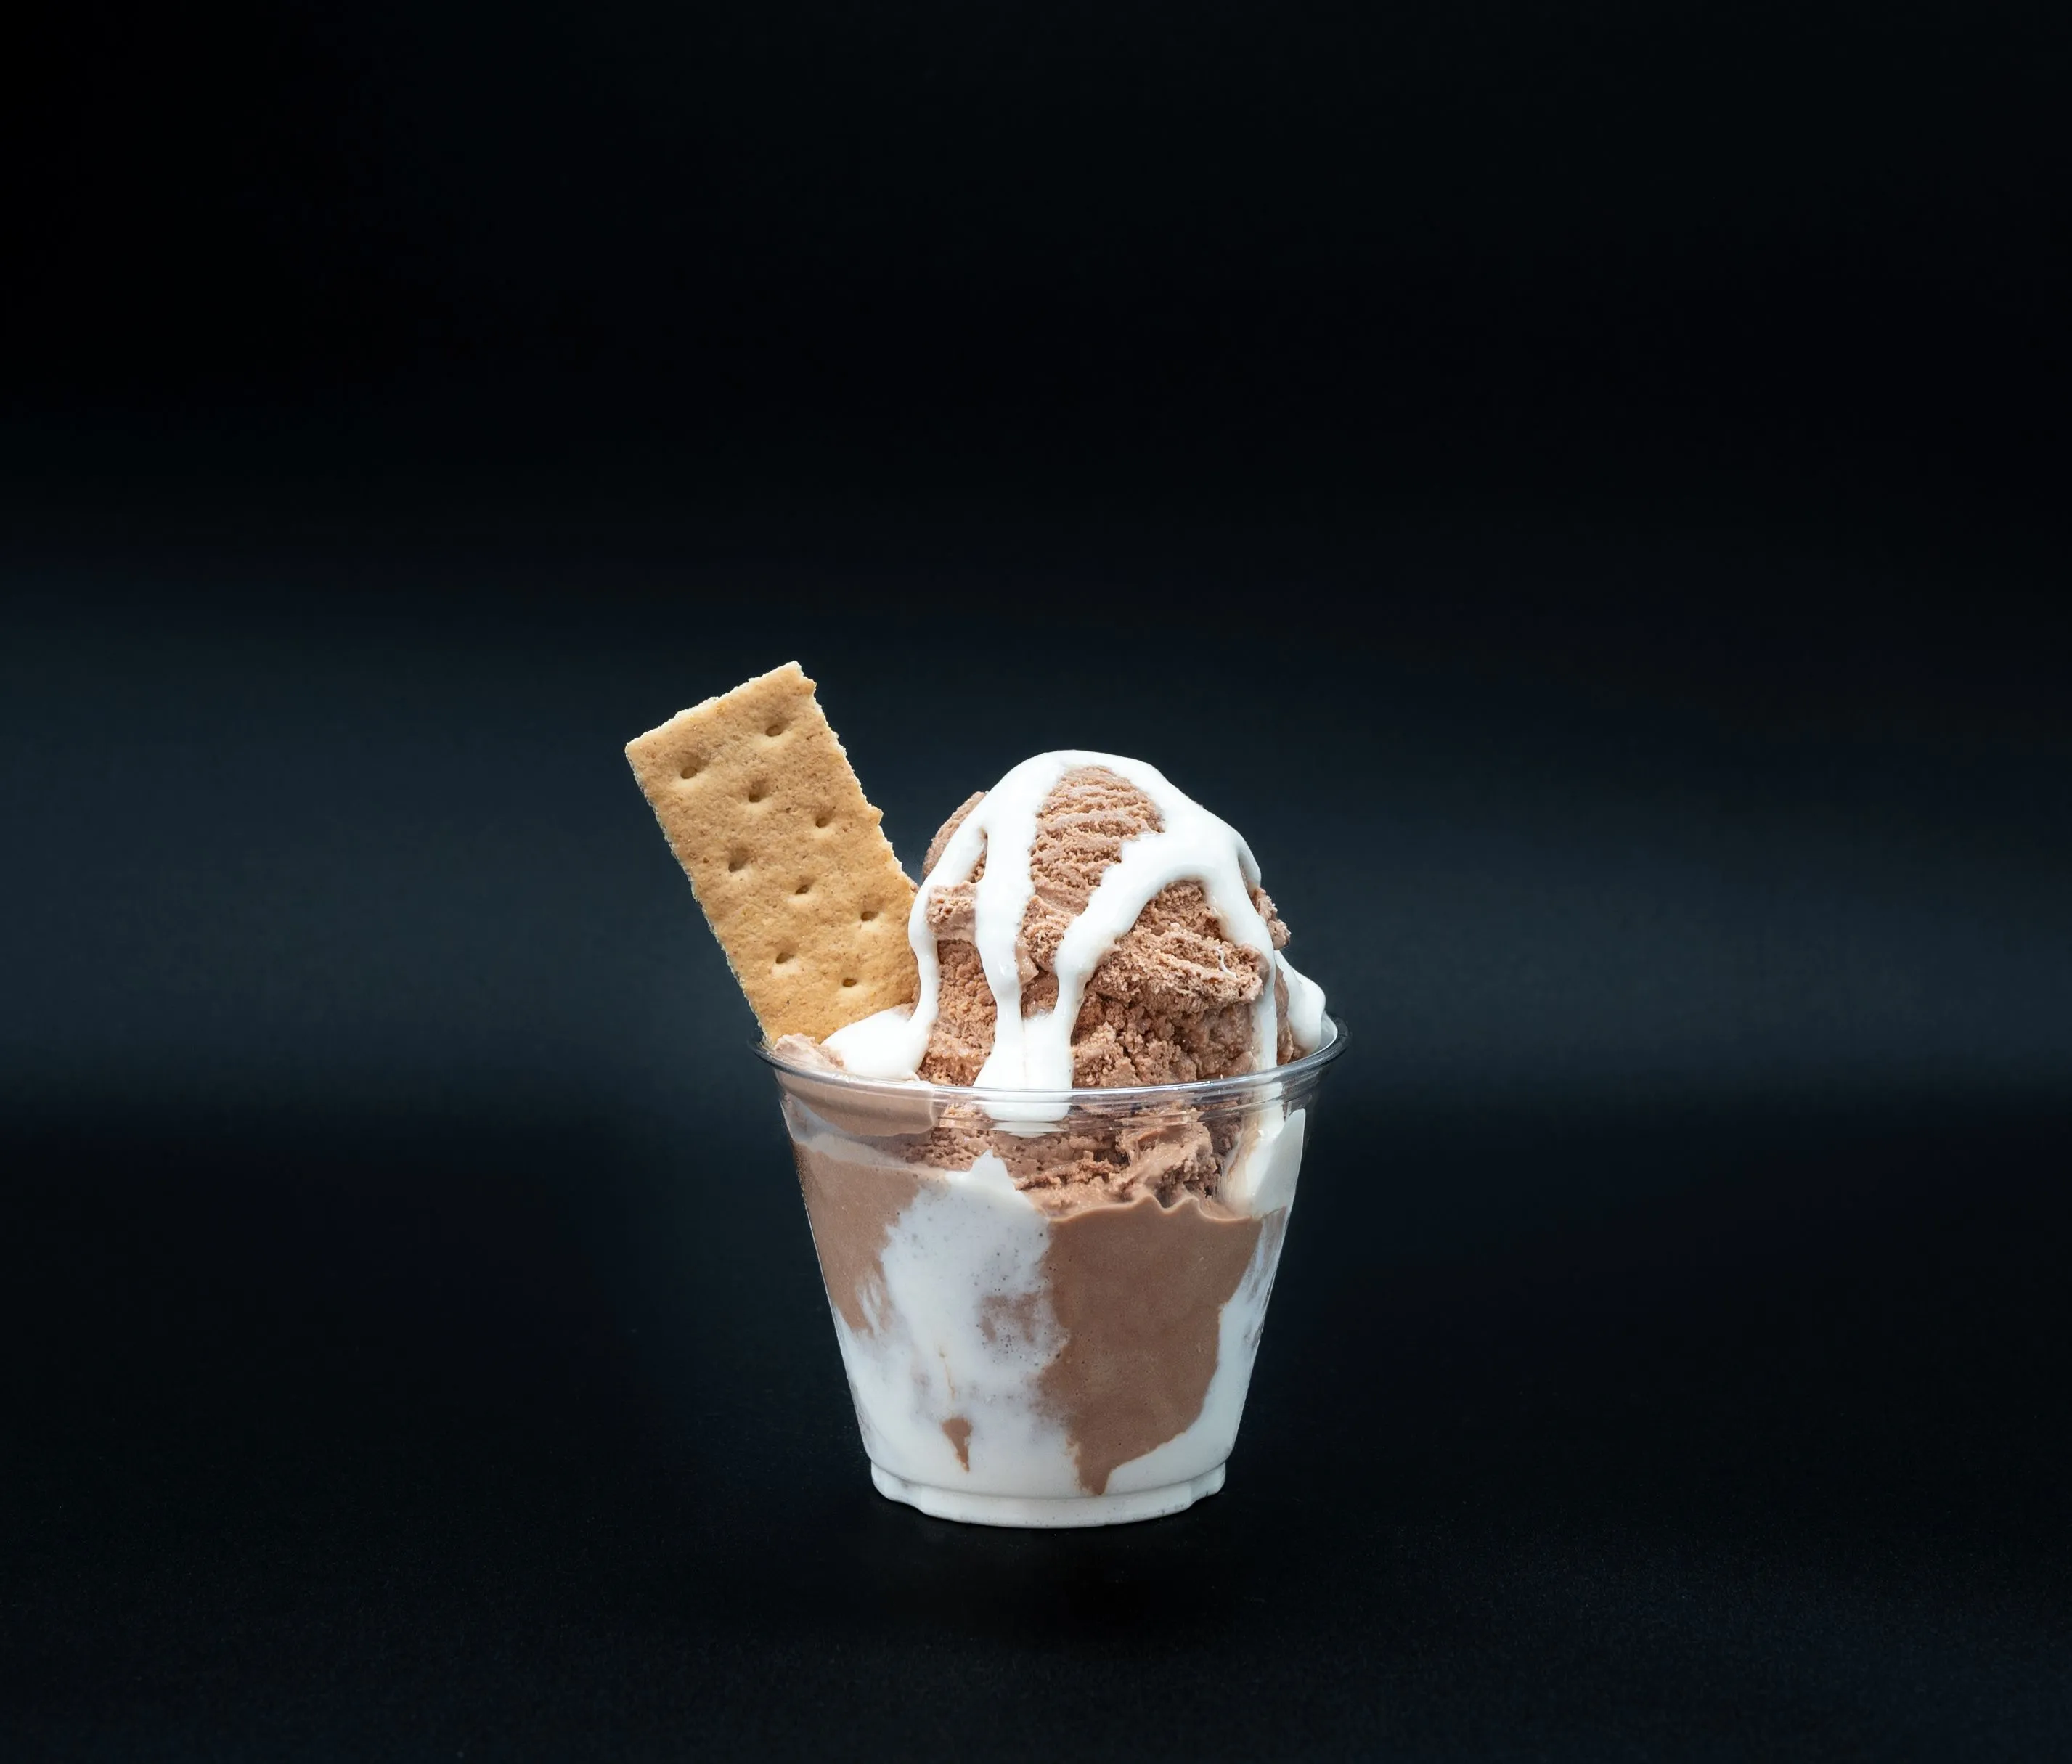 A cup of chocolate and vanilla ice cream with a biscuit stick on a dark background.